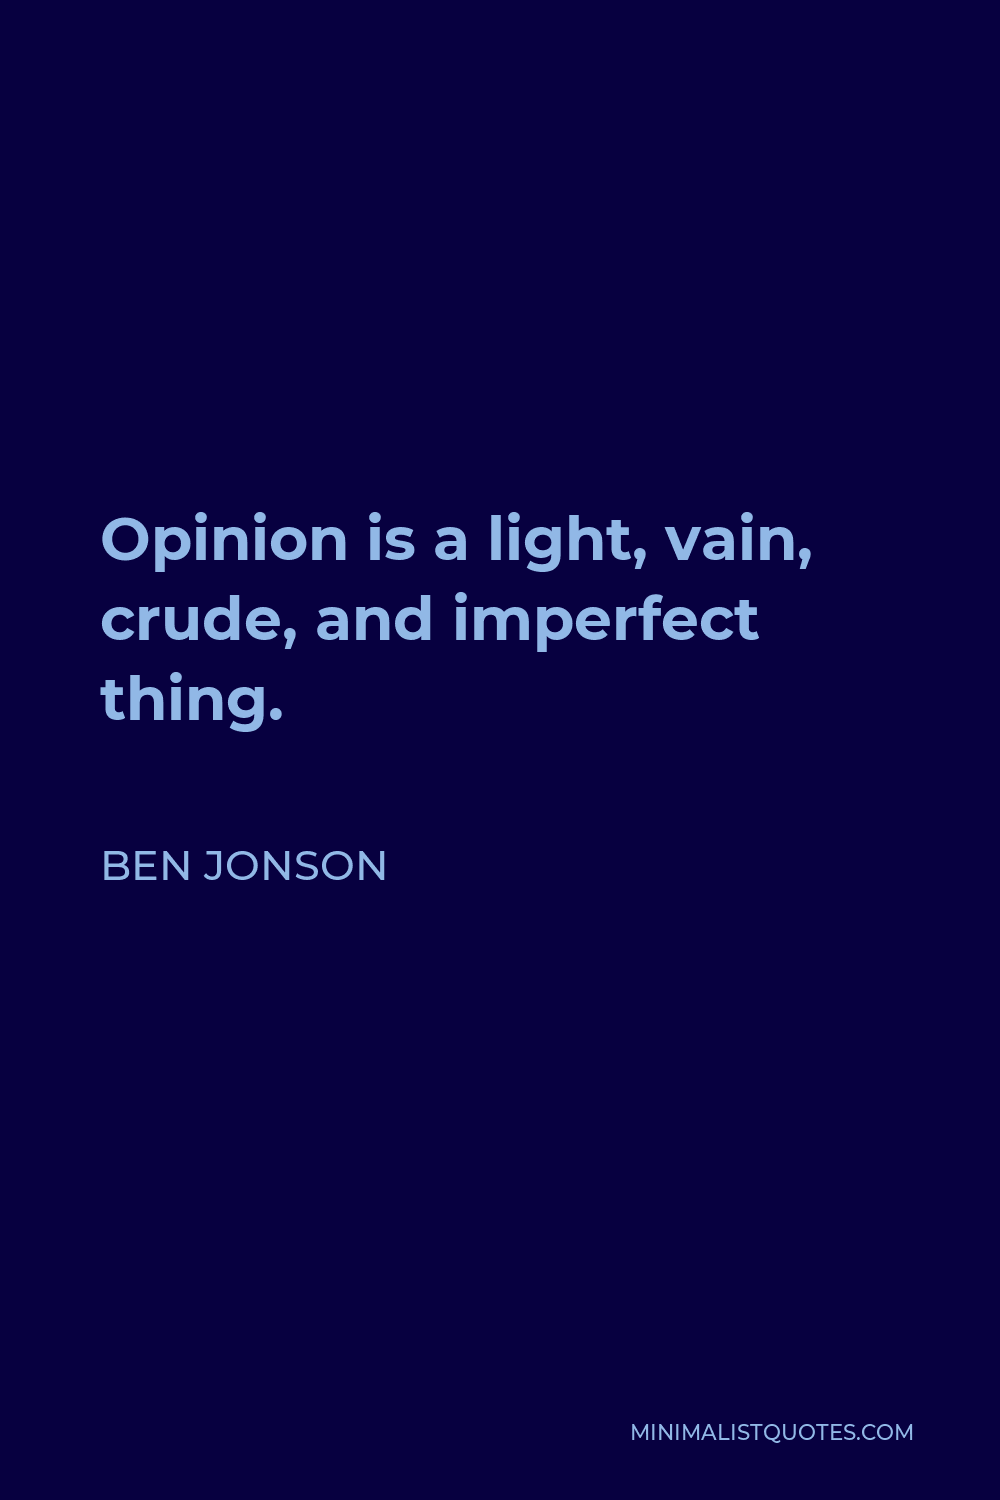 Ben Jonson Quote - Opinion is a light, vain, crude, and imperfect thing.